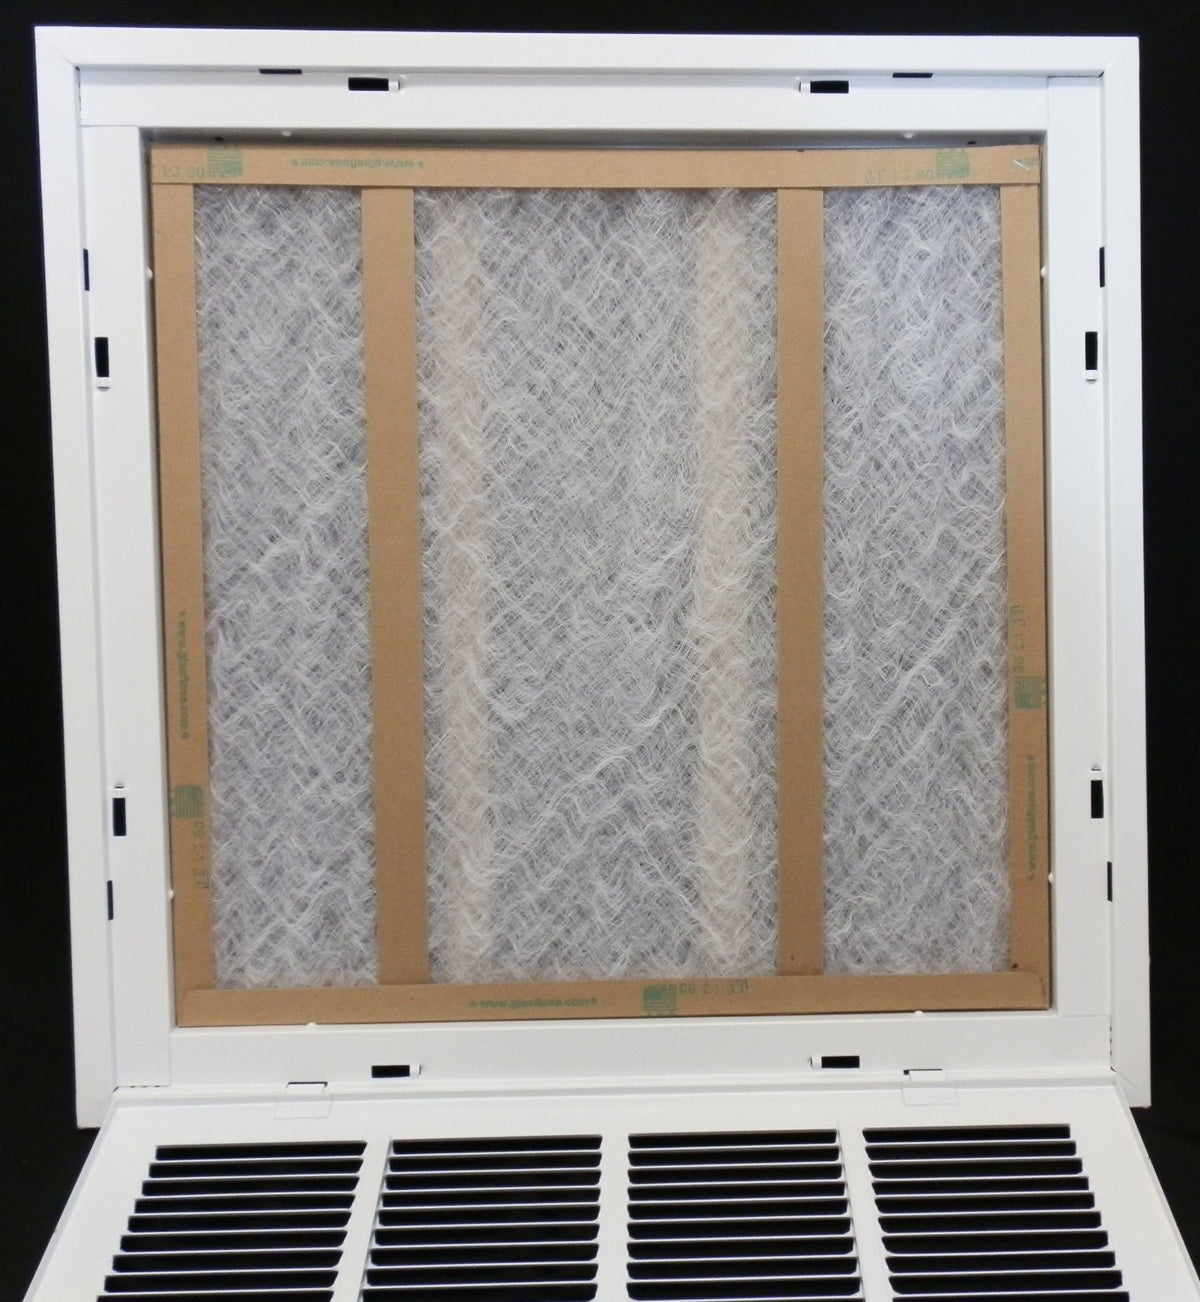 30&quot; X 14&quot; Steel Return Air Filter Grille for 1&quot; Filter - Removable Frame - [Outer Dimensions: 32 5/8&quot; X 16 5/8&quot;]